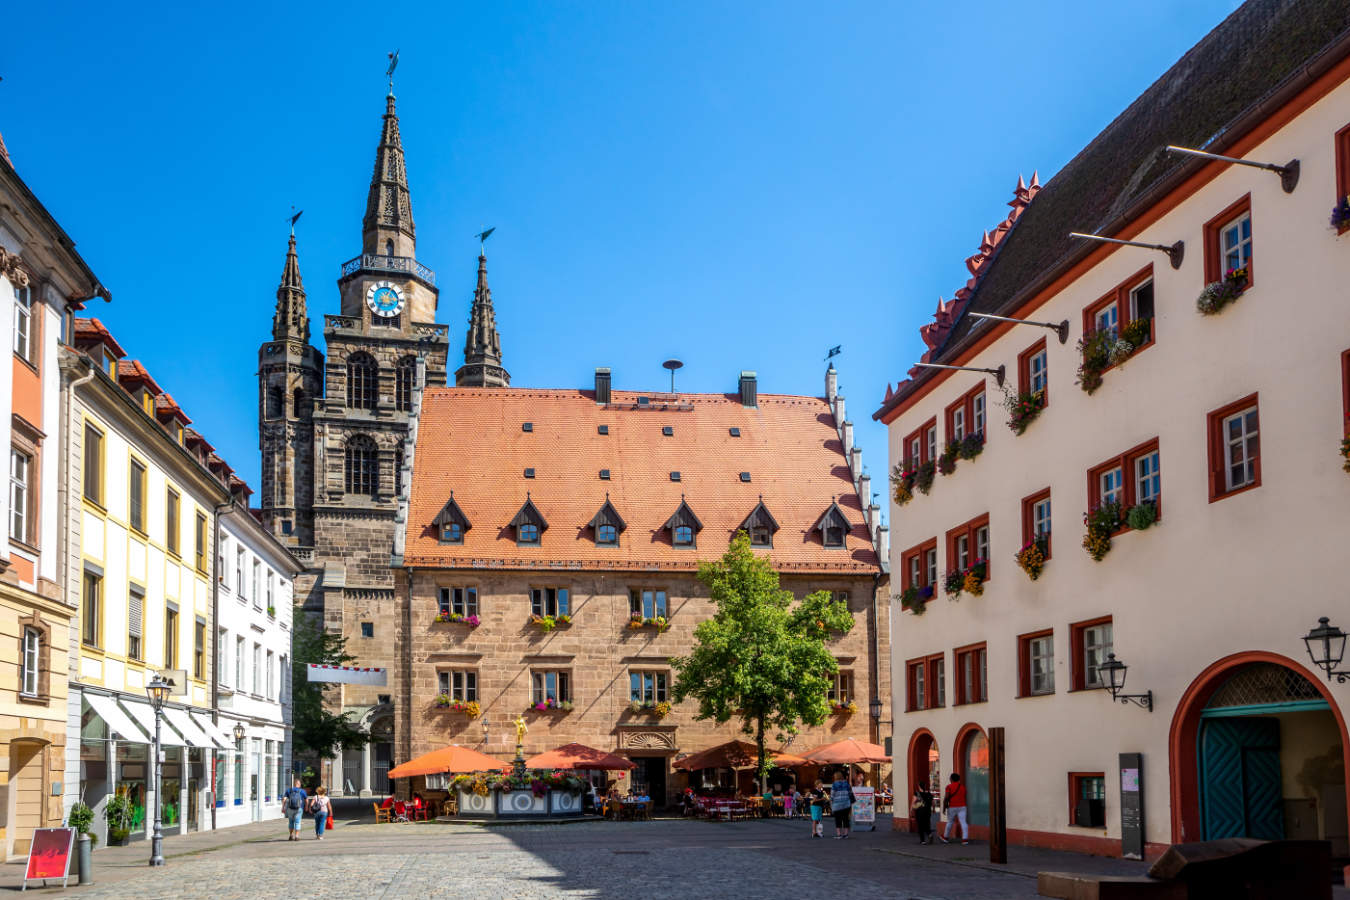 Historical city of Ansbach, Germany